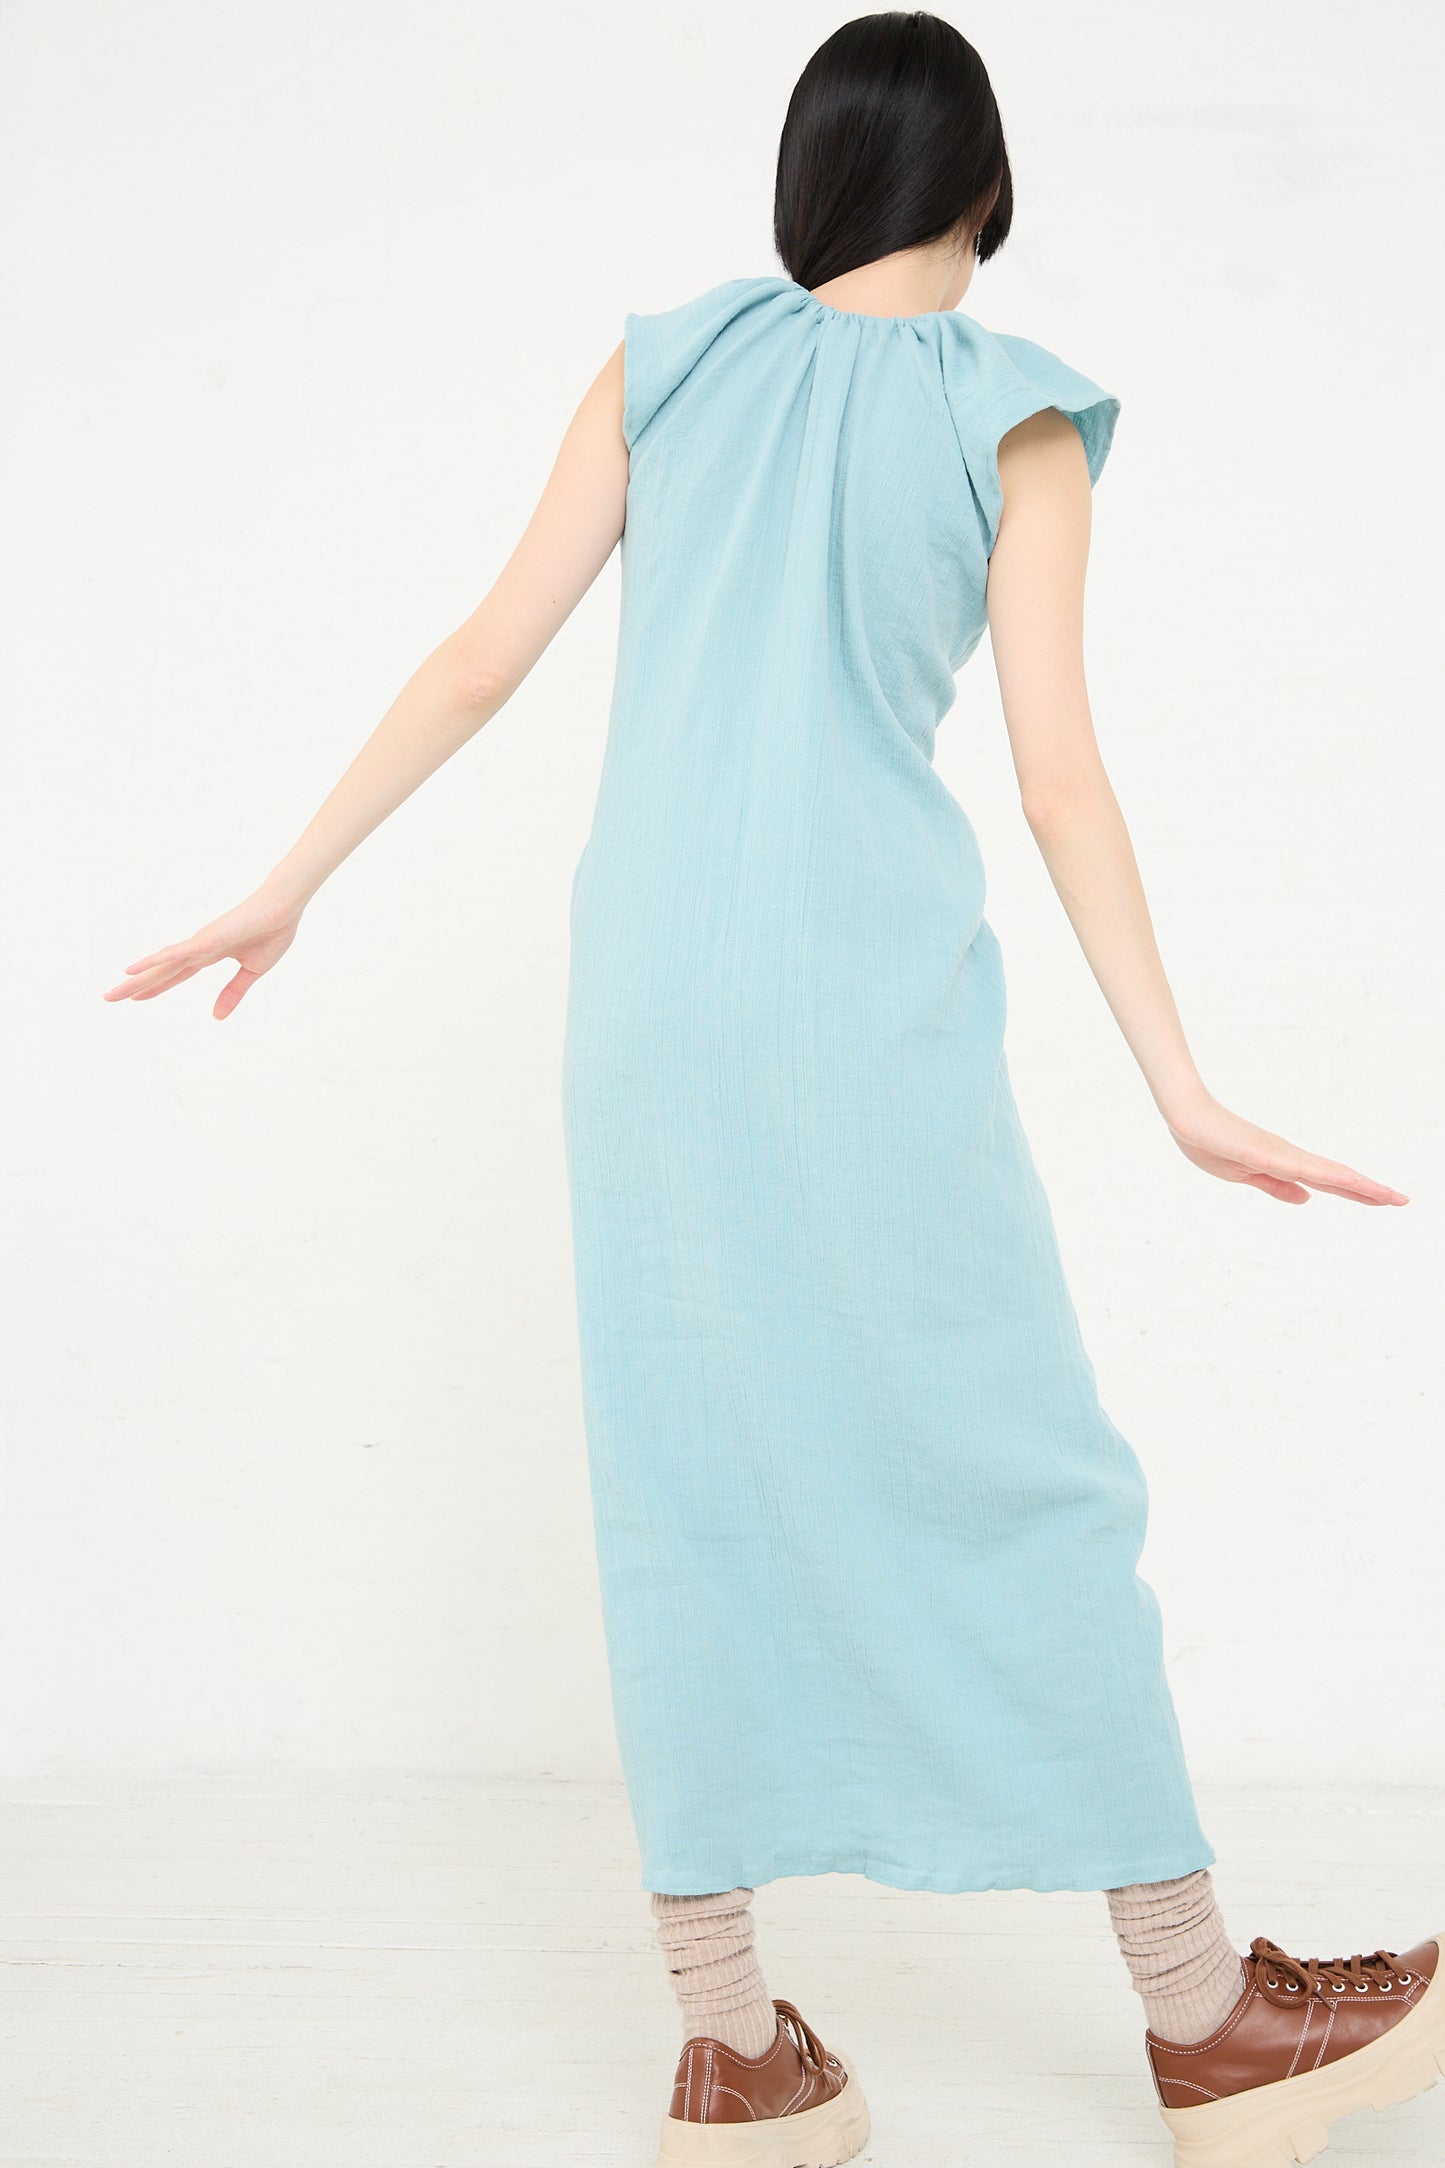 A woman seen from behind, wearing a Crinkle Linen Cotton Max Dress in Wuxi Blue by Baserange and brown shoes, is standing with her arms spread out to the sides against a plain background.